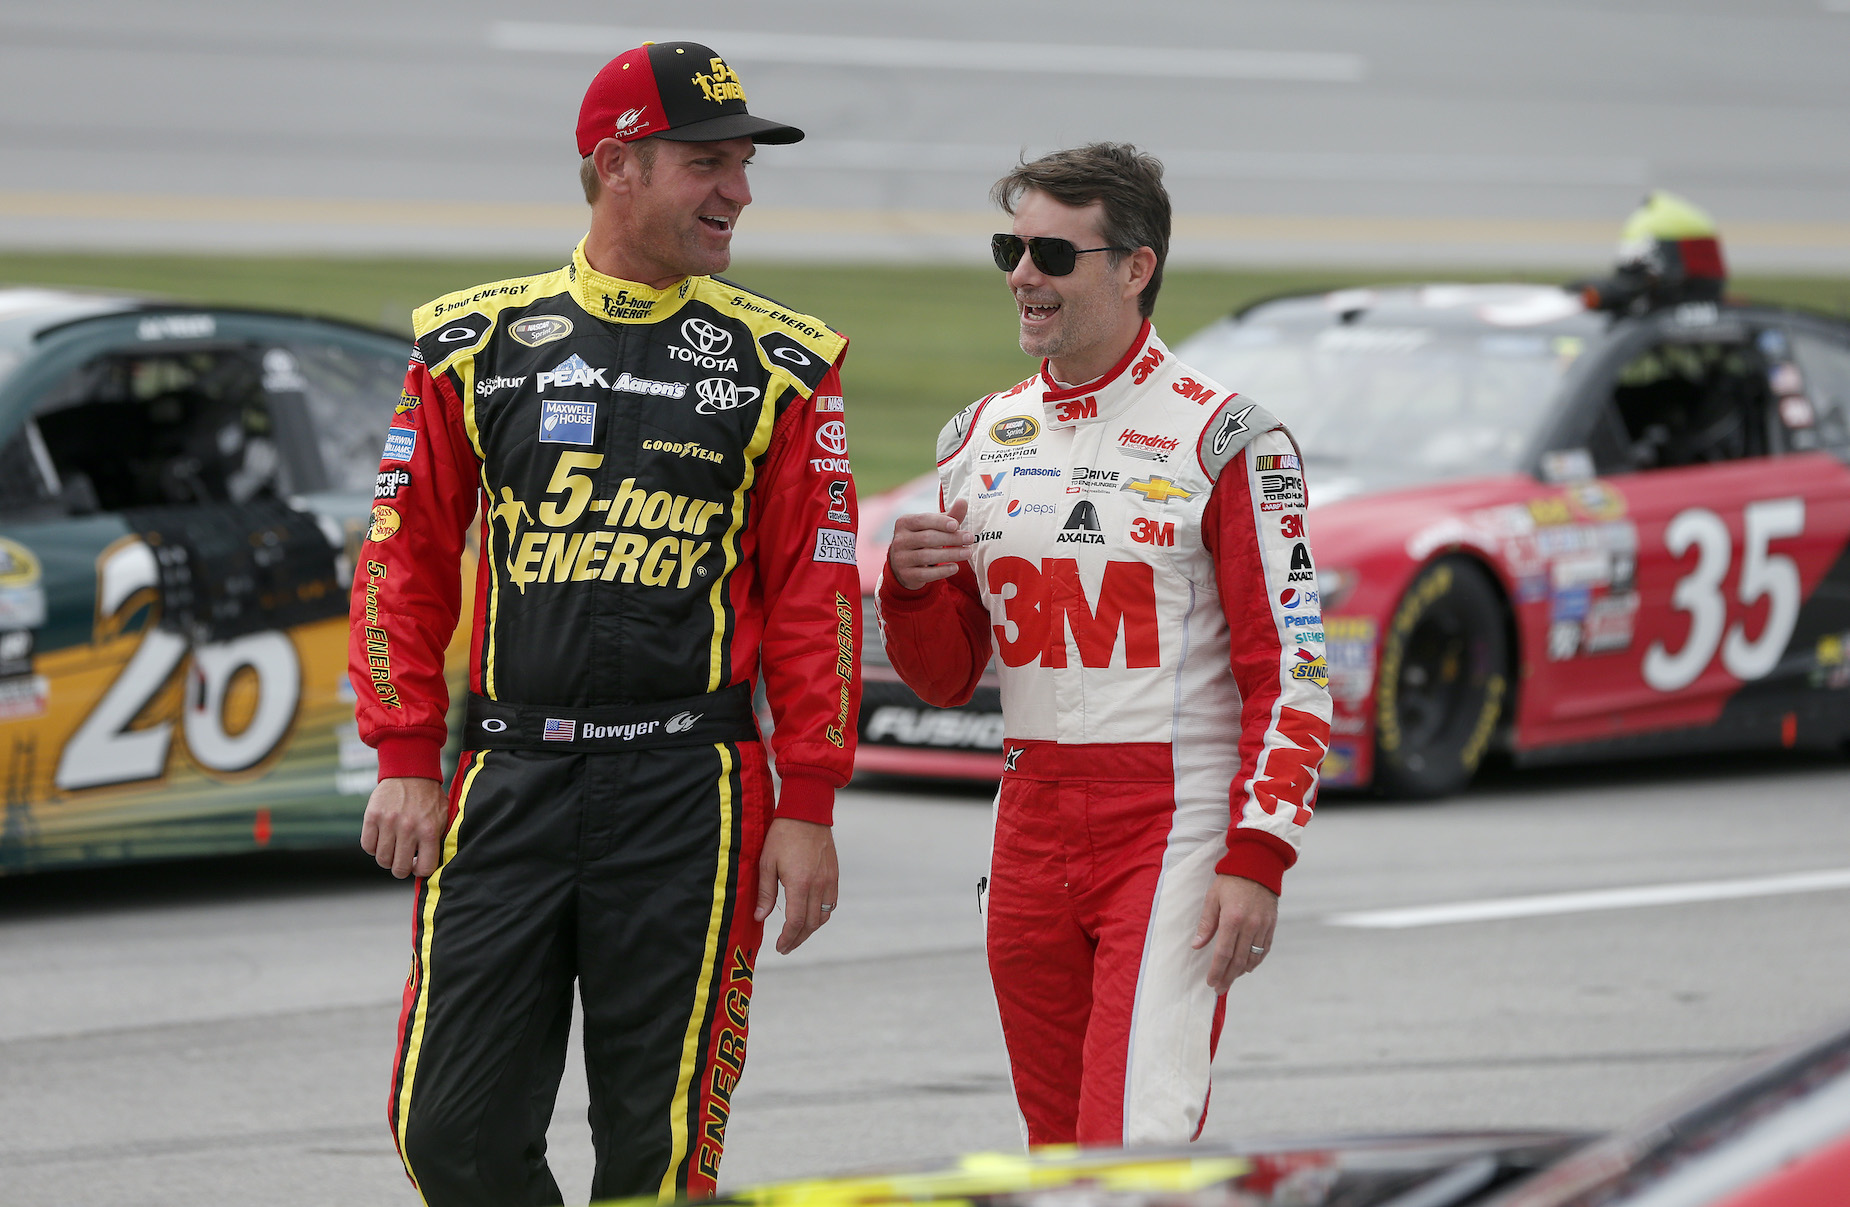 Clint Bowyer (L) and Jeff Gordon (R) walk and talk together on the NASCAR grid.